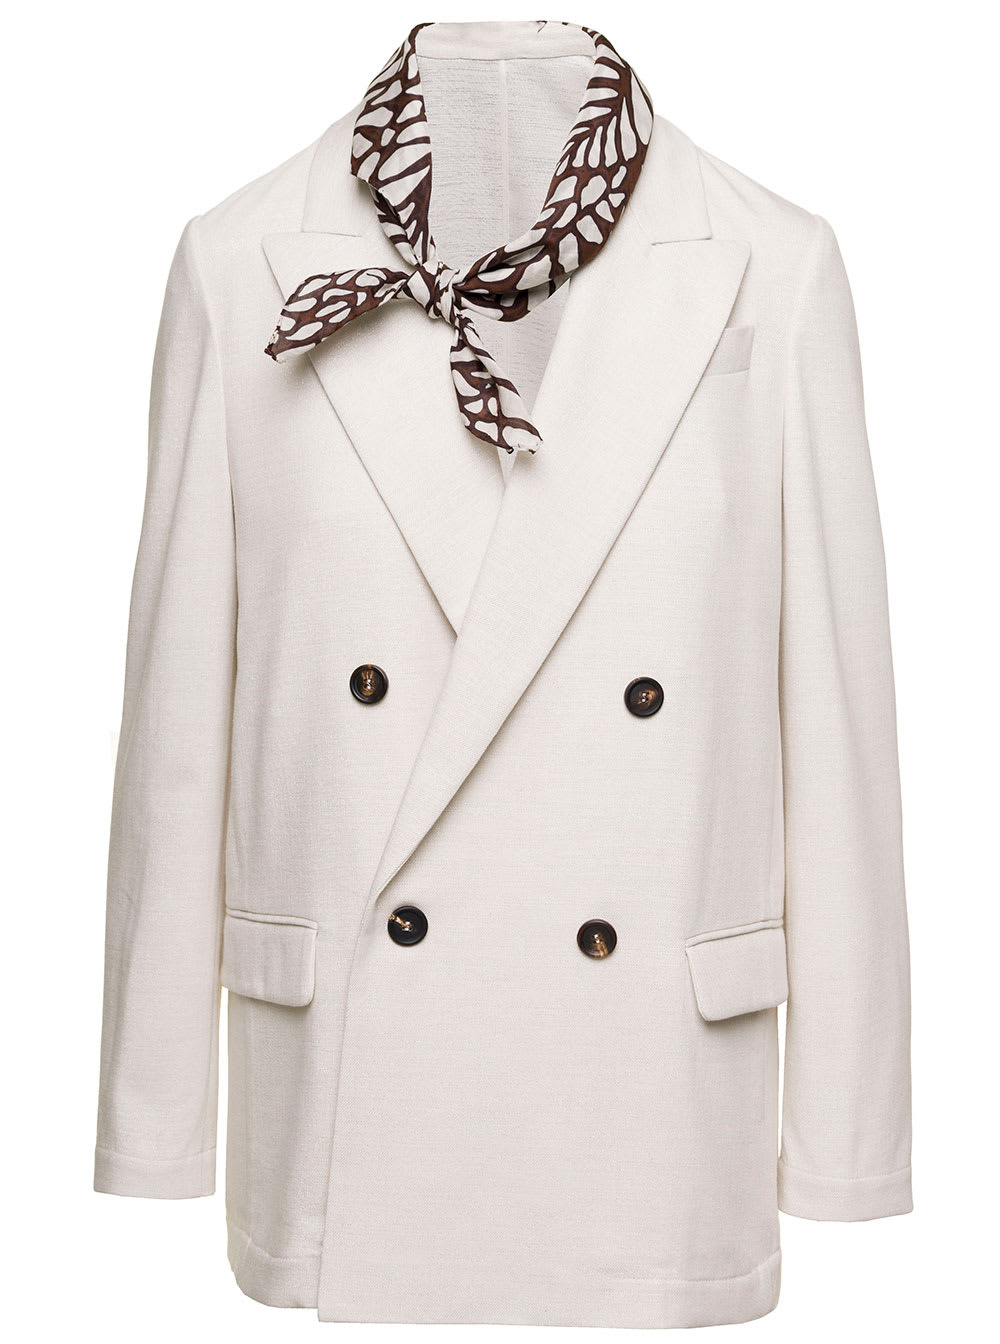 BRUNELLO CUCINELLI WHITE DOUBLE-BREASTED JACKET WITH BANDANA IN COTTON AND VISCOSE BLEND WOMAN BRUNELLO CUCINELLI